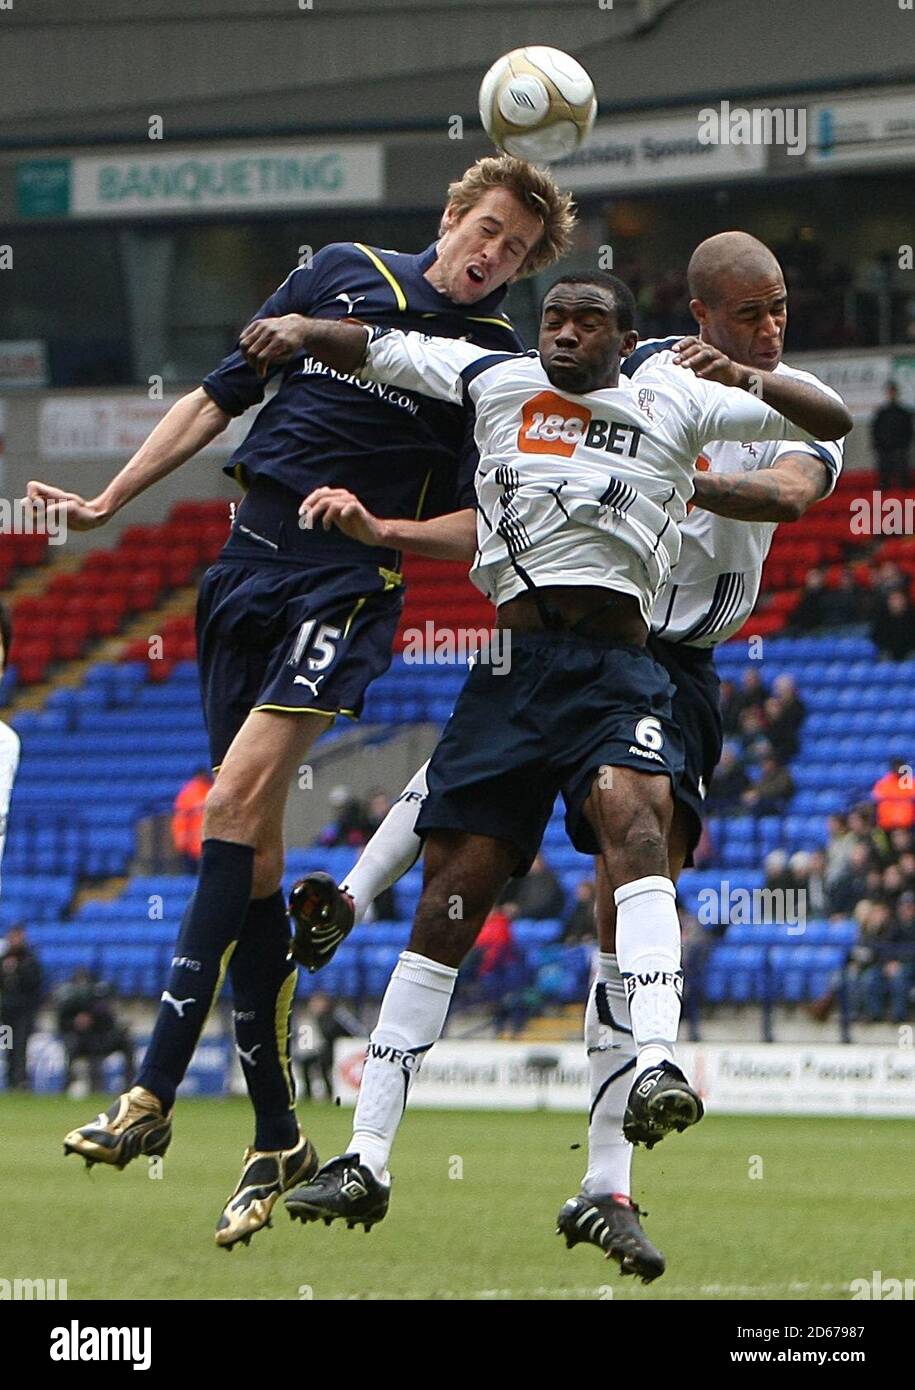 Tottenham Hotspur's Peter Crouch (left) battles for the ball with Bolton Wanderers' Fabrice Muamba (centre) and Zat Knight (right) Stock Photo